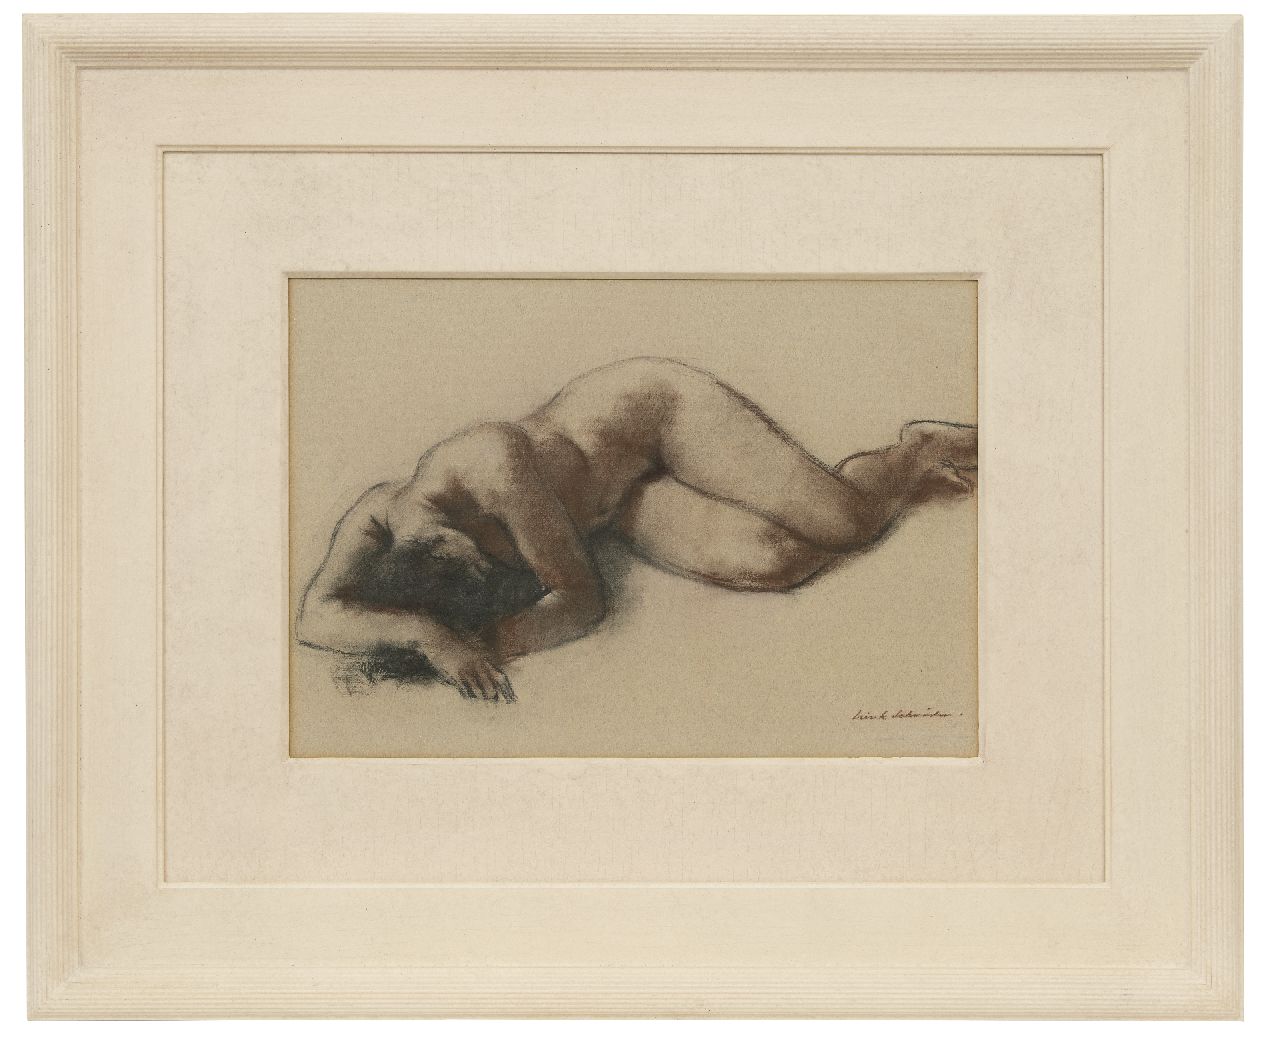 Schröder S.C.  | 'Sierk' Carl Schröder | Watercolours and drawings offered for sale | Reclining nude, charcoal and chalk on coloured paper 34.8 x 49.8 cm, signed l.r.